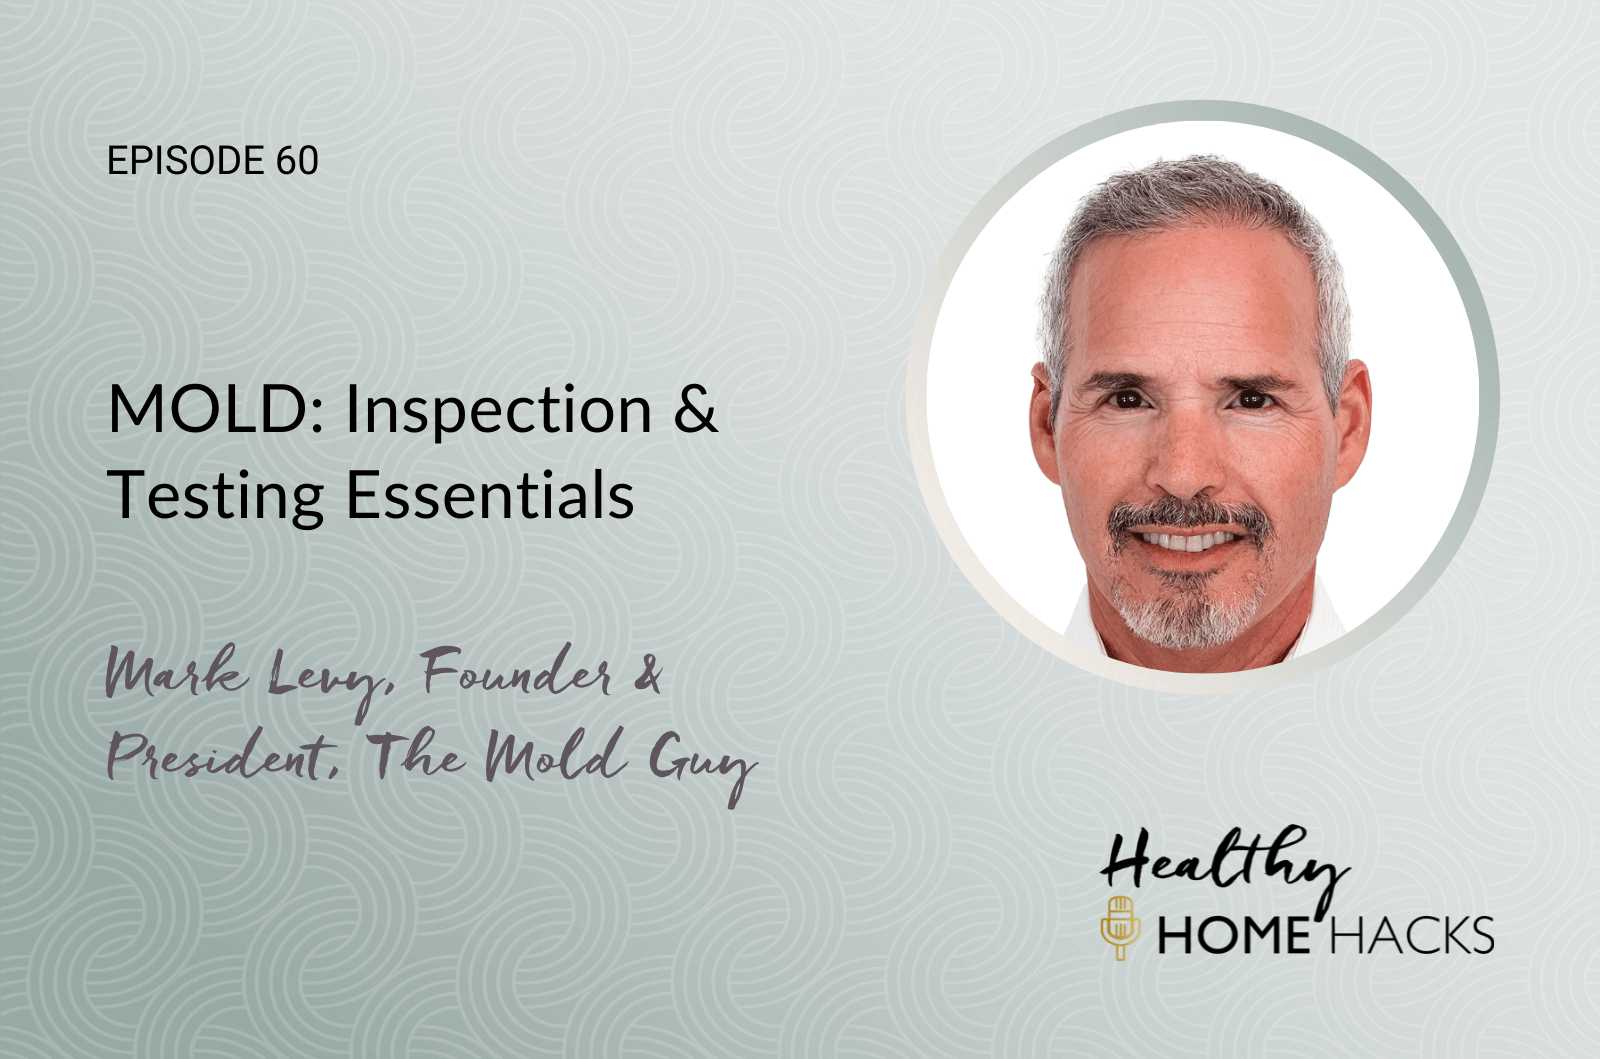 MOLD: Inspection & Testing Essentials